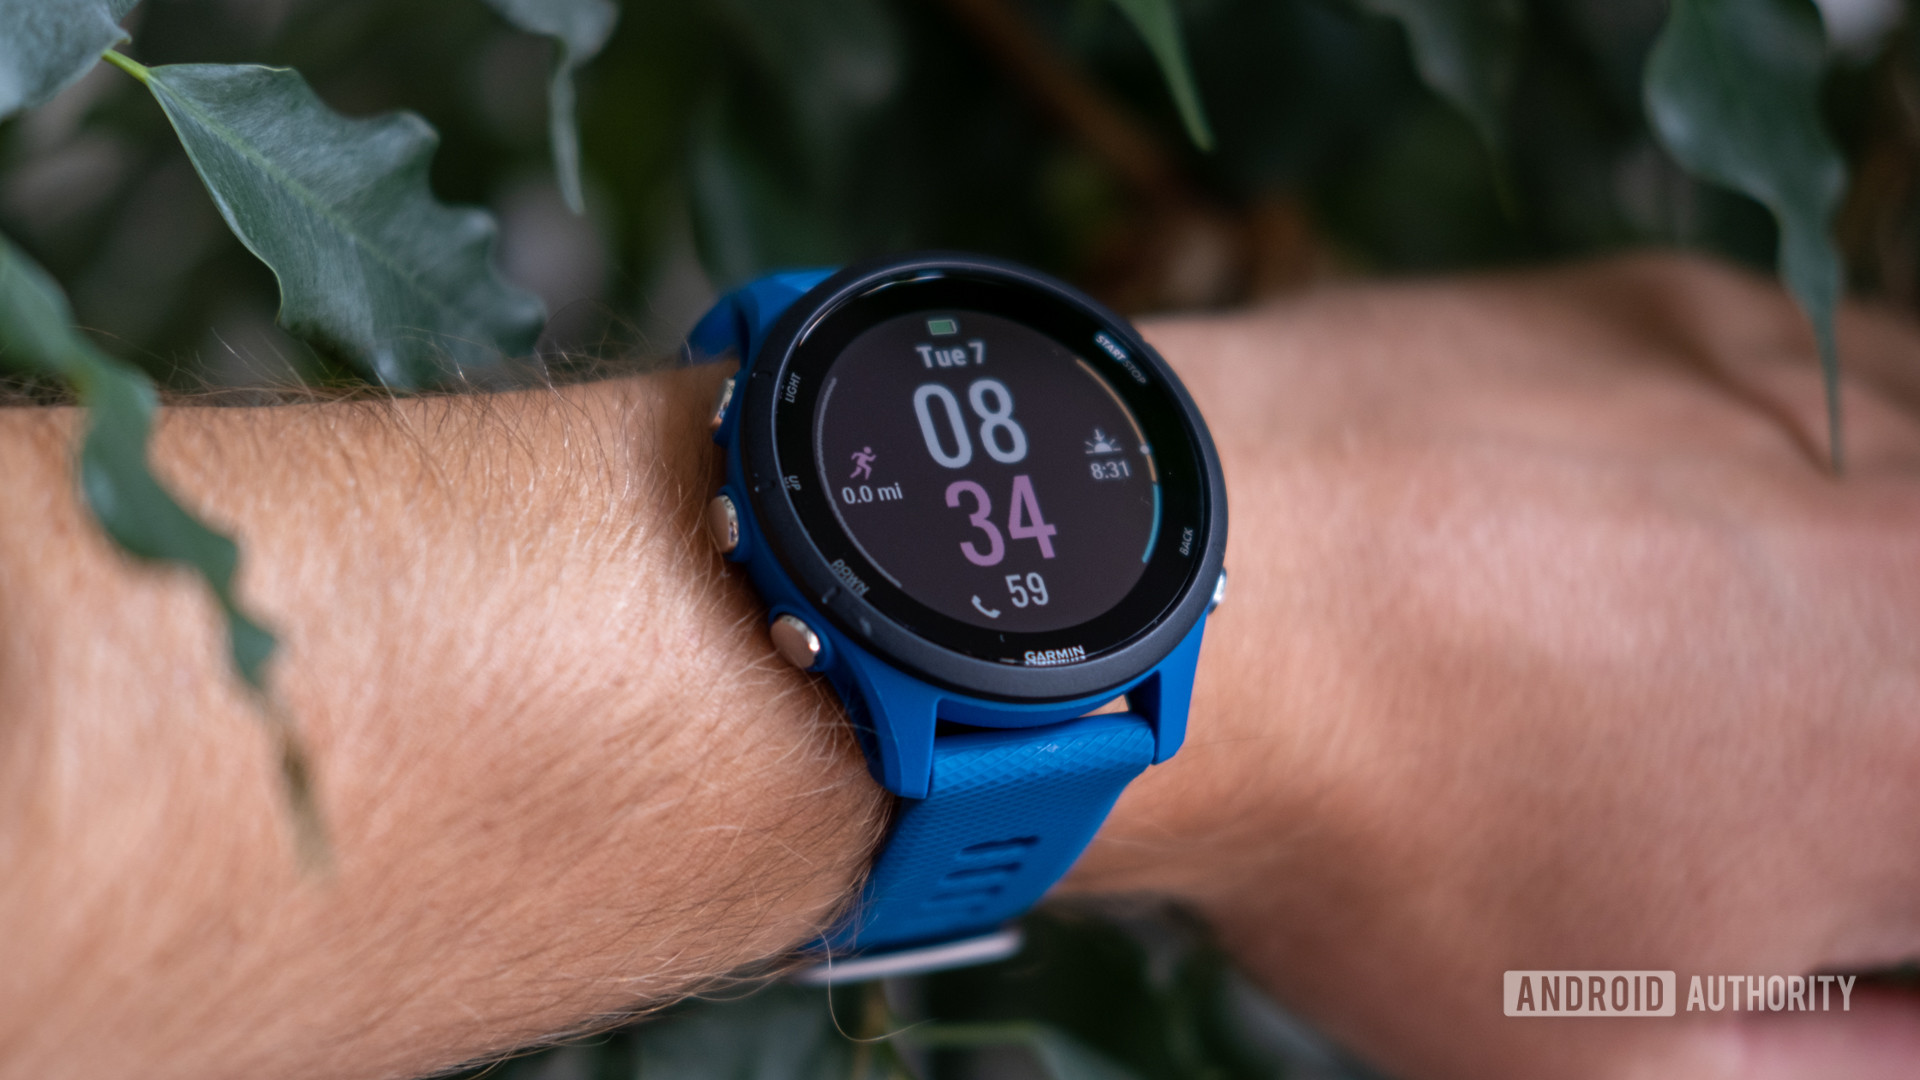 Adentro Impresionismo Precursor Garmin Forerunner 255 review: Running back to the top - Android Authority